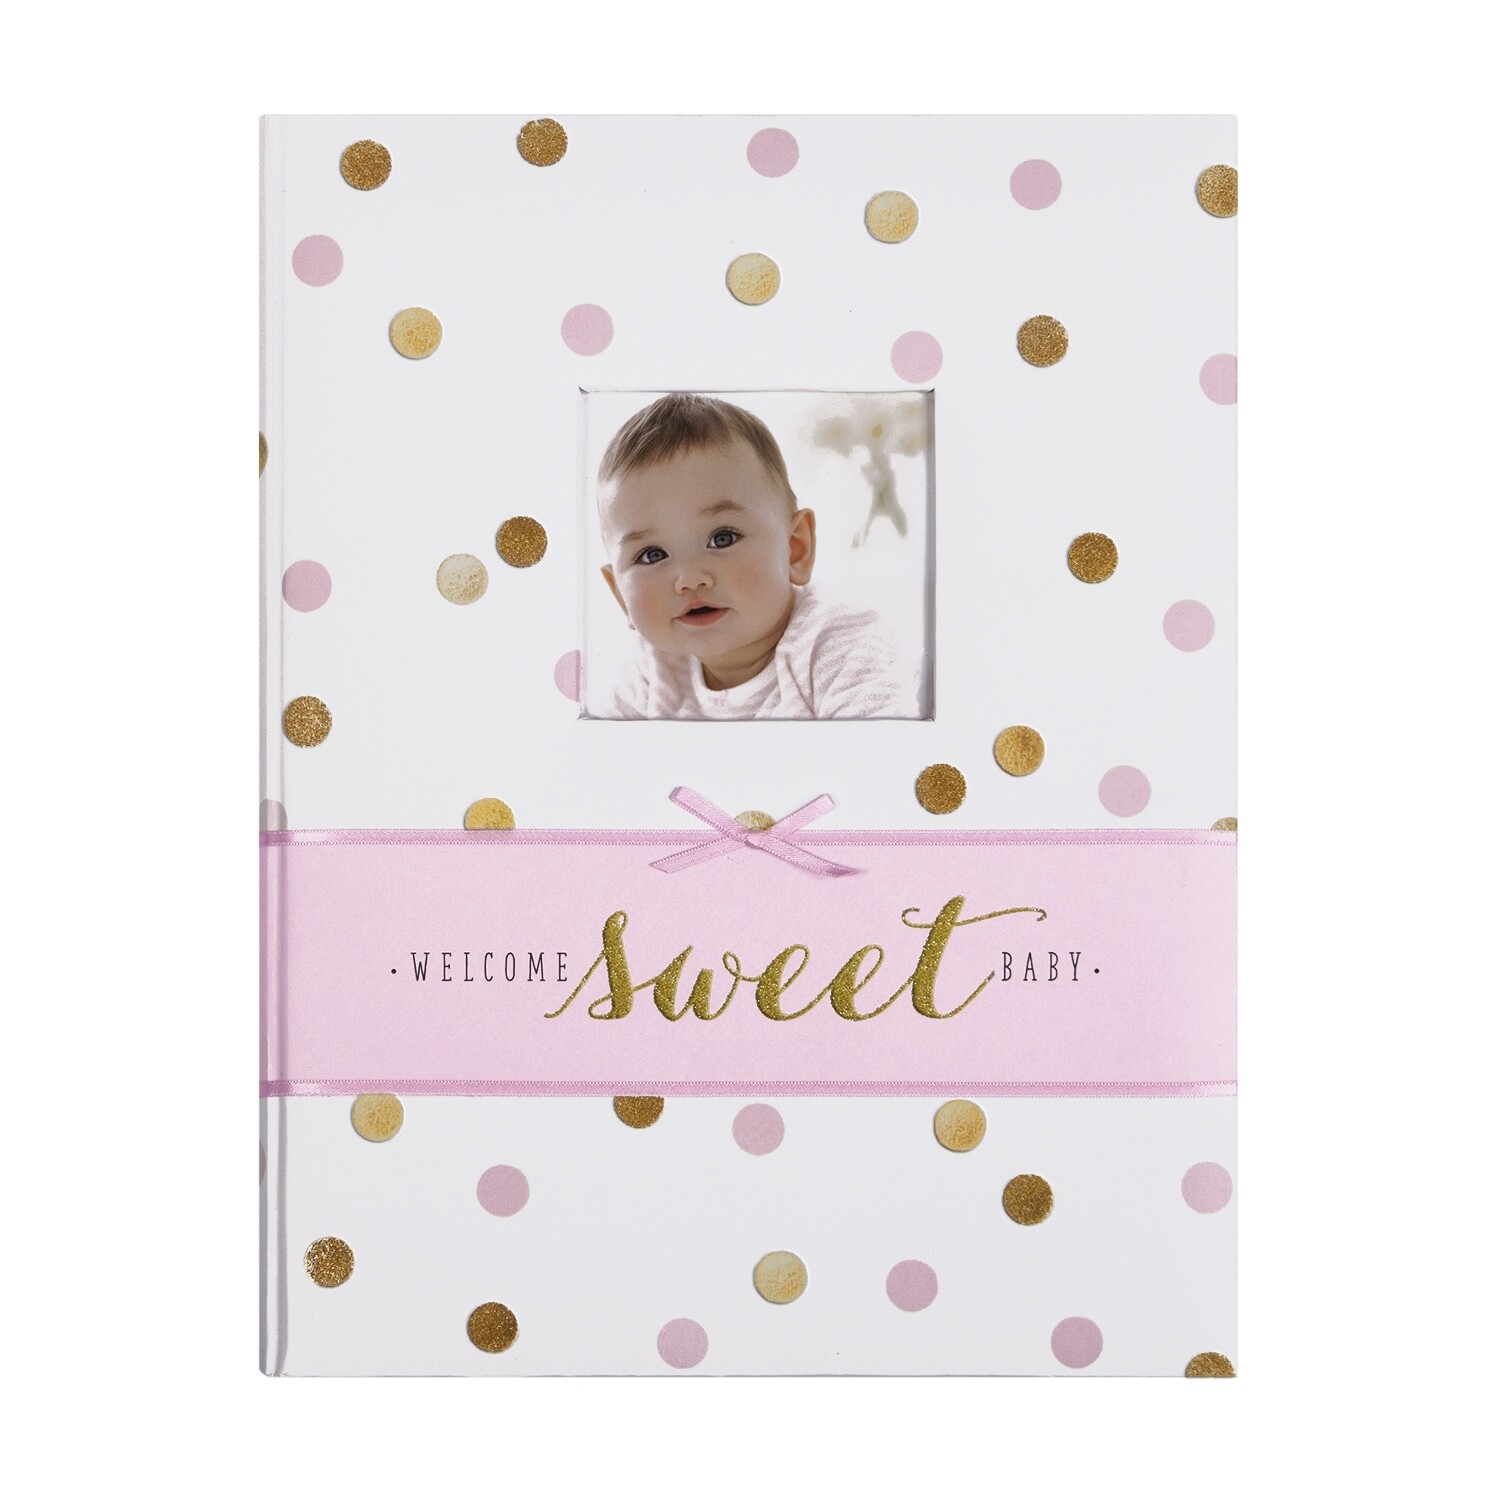 Carter's Memory Book - Sweet Sparkle